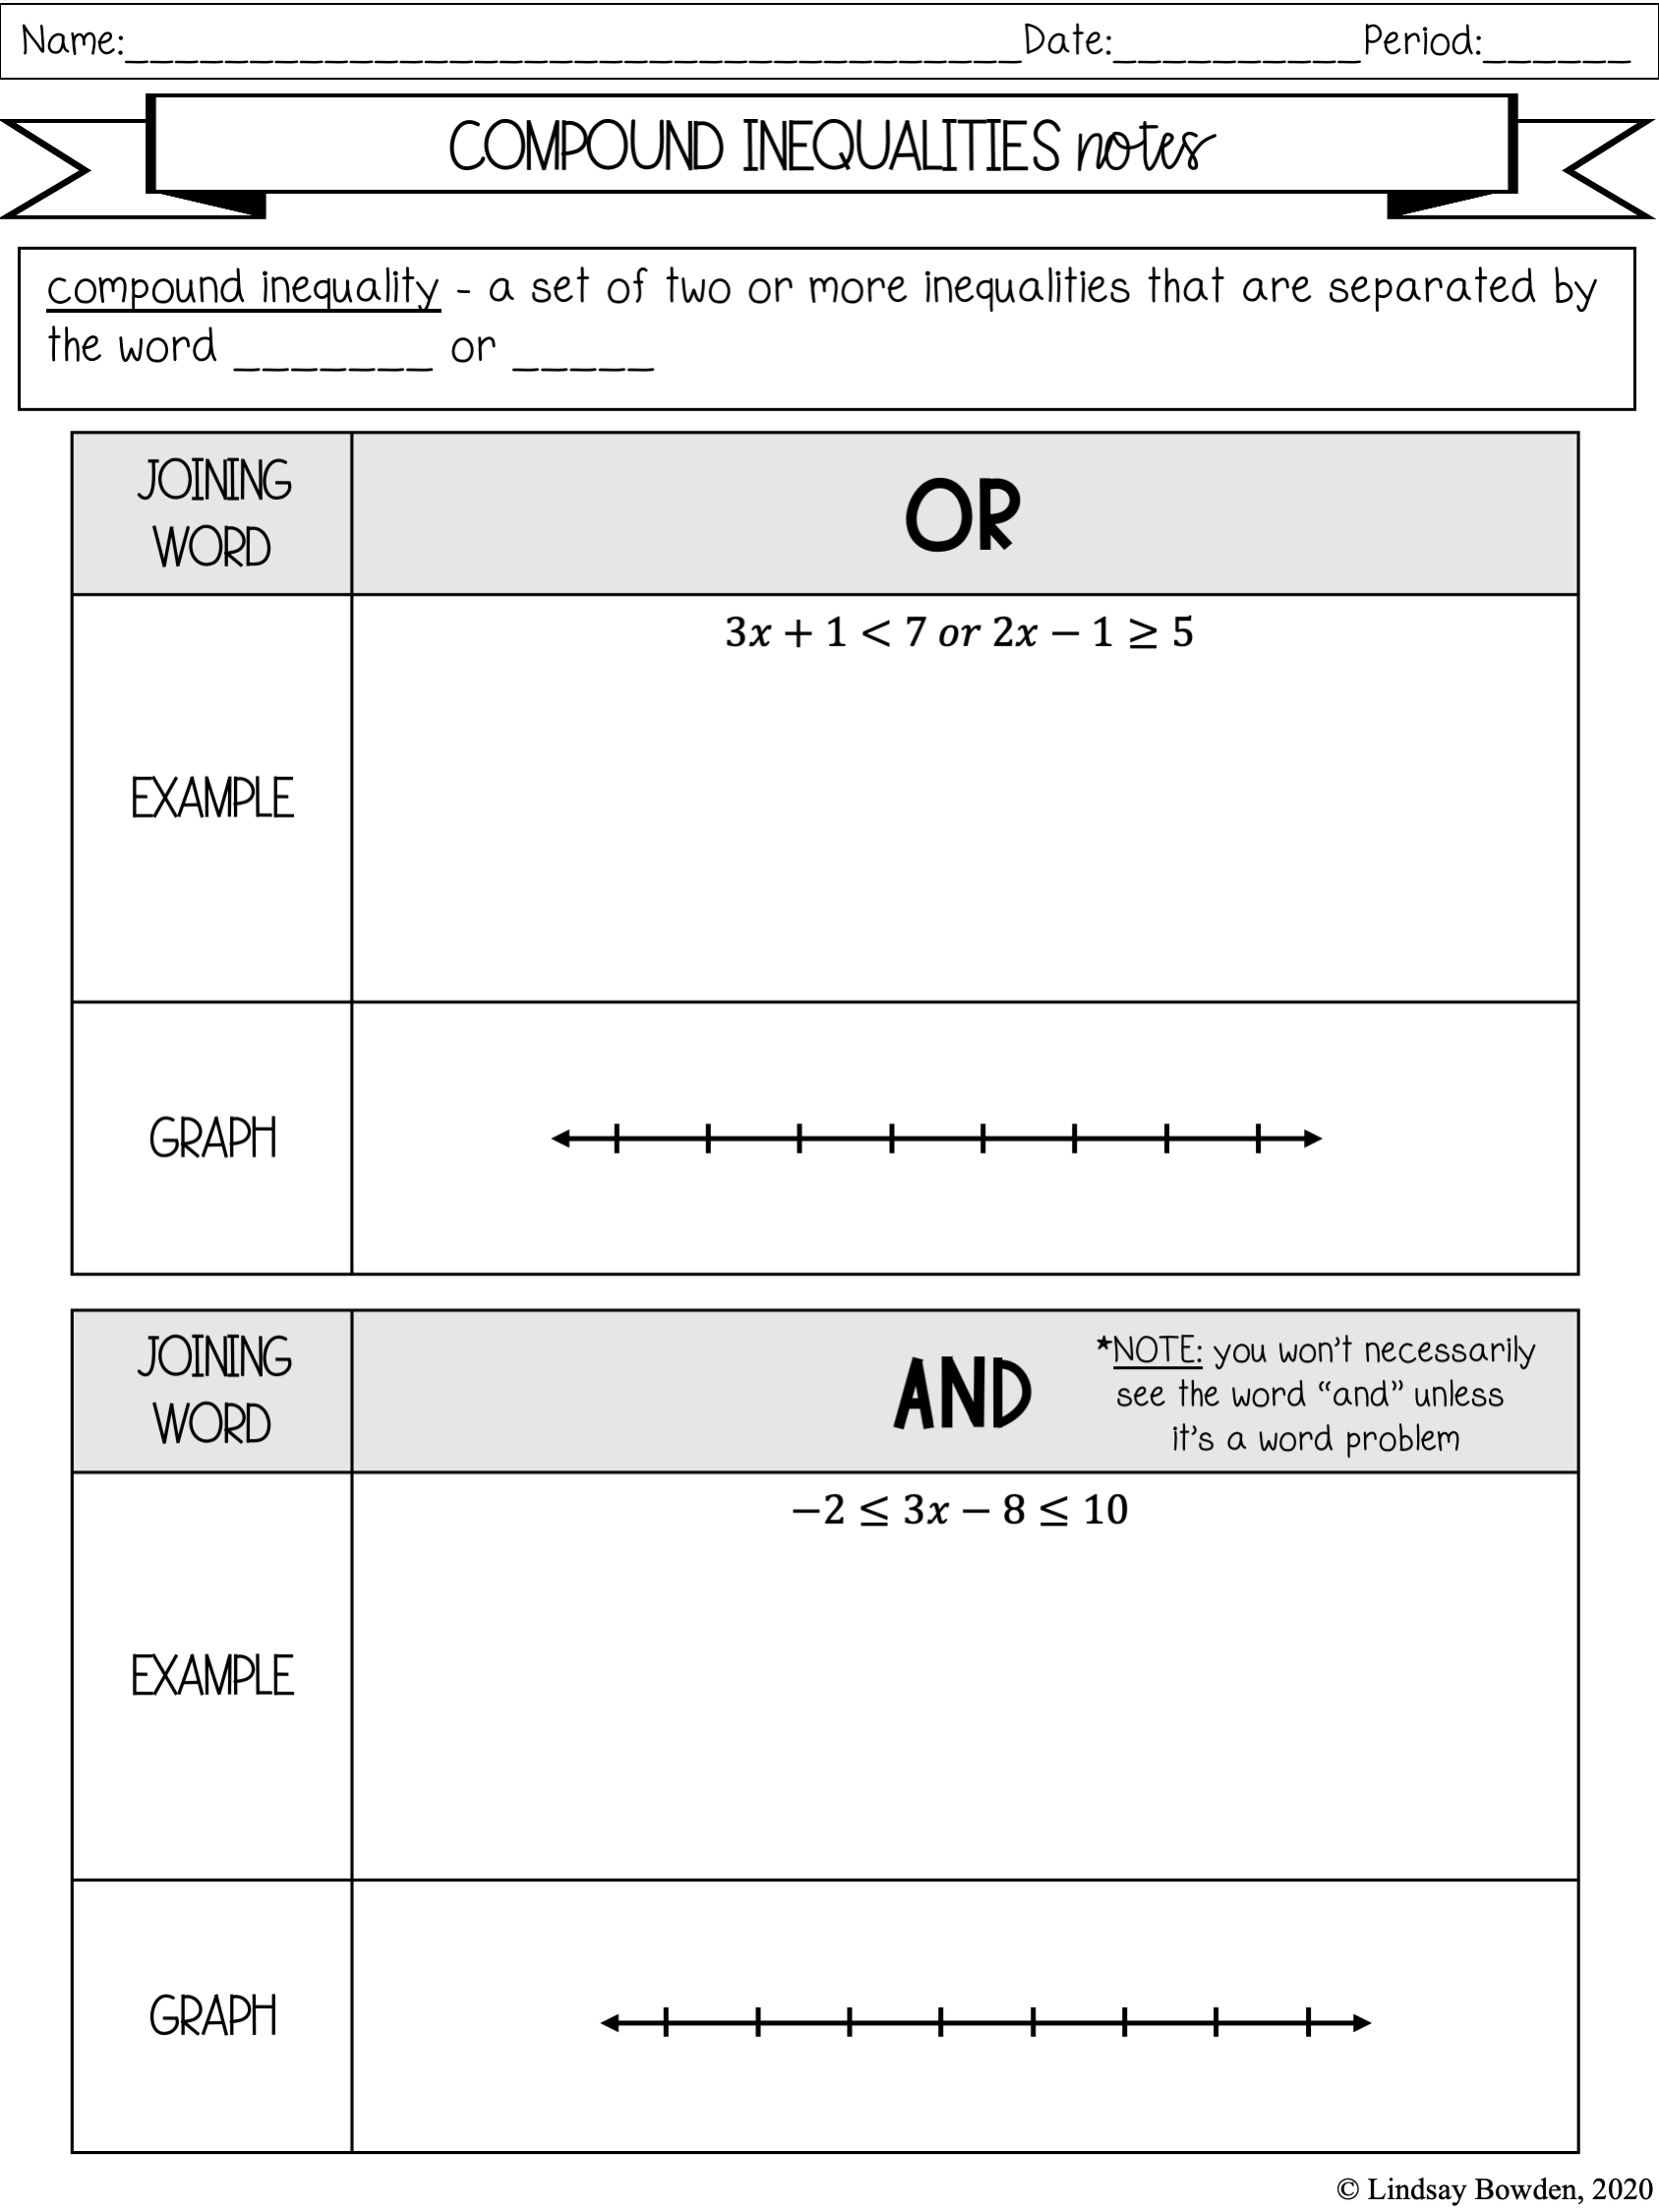 Compound Inequalities Notes and Worksheets - Lindsay Bowden With Compound Inequalities Worksheet Answers